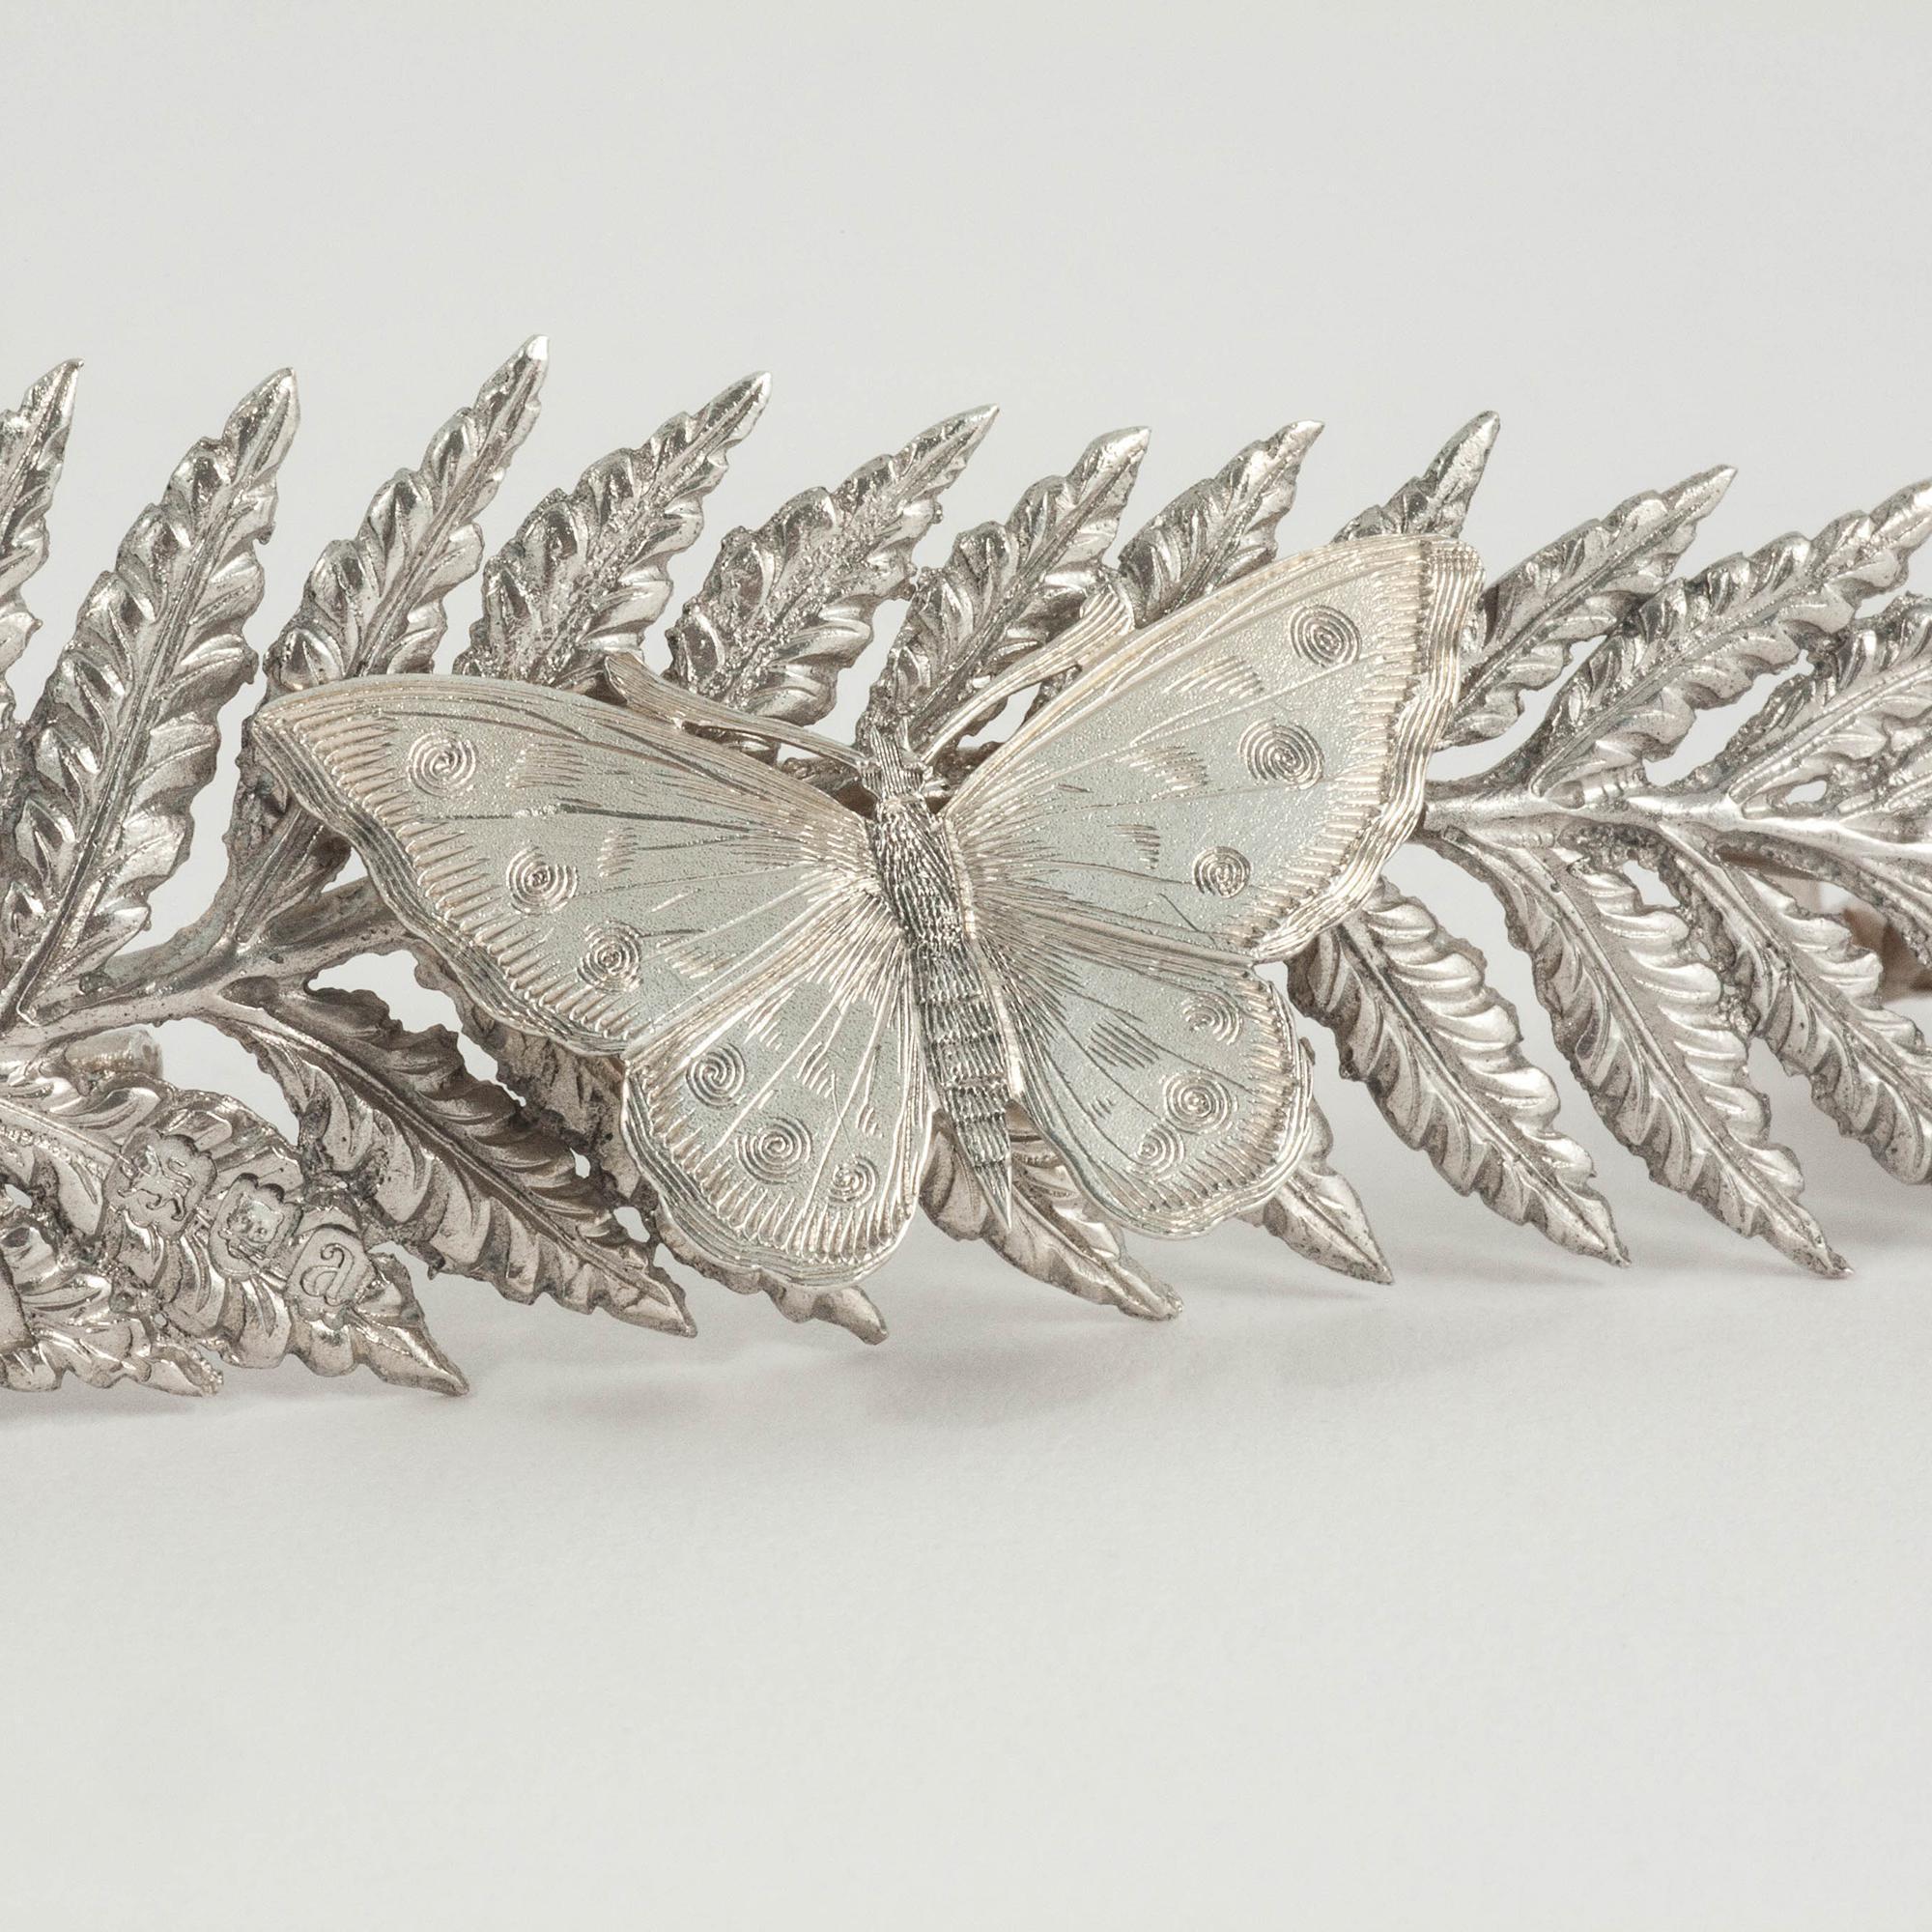 English Set 6 Victorian Silver Butterfly Menu or Place Card Holders